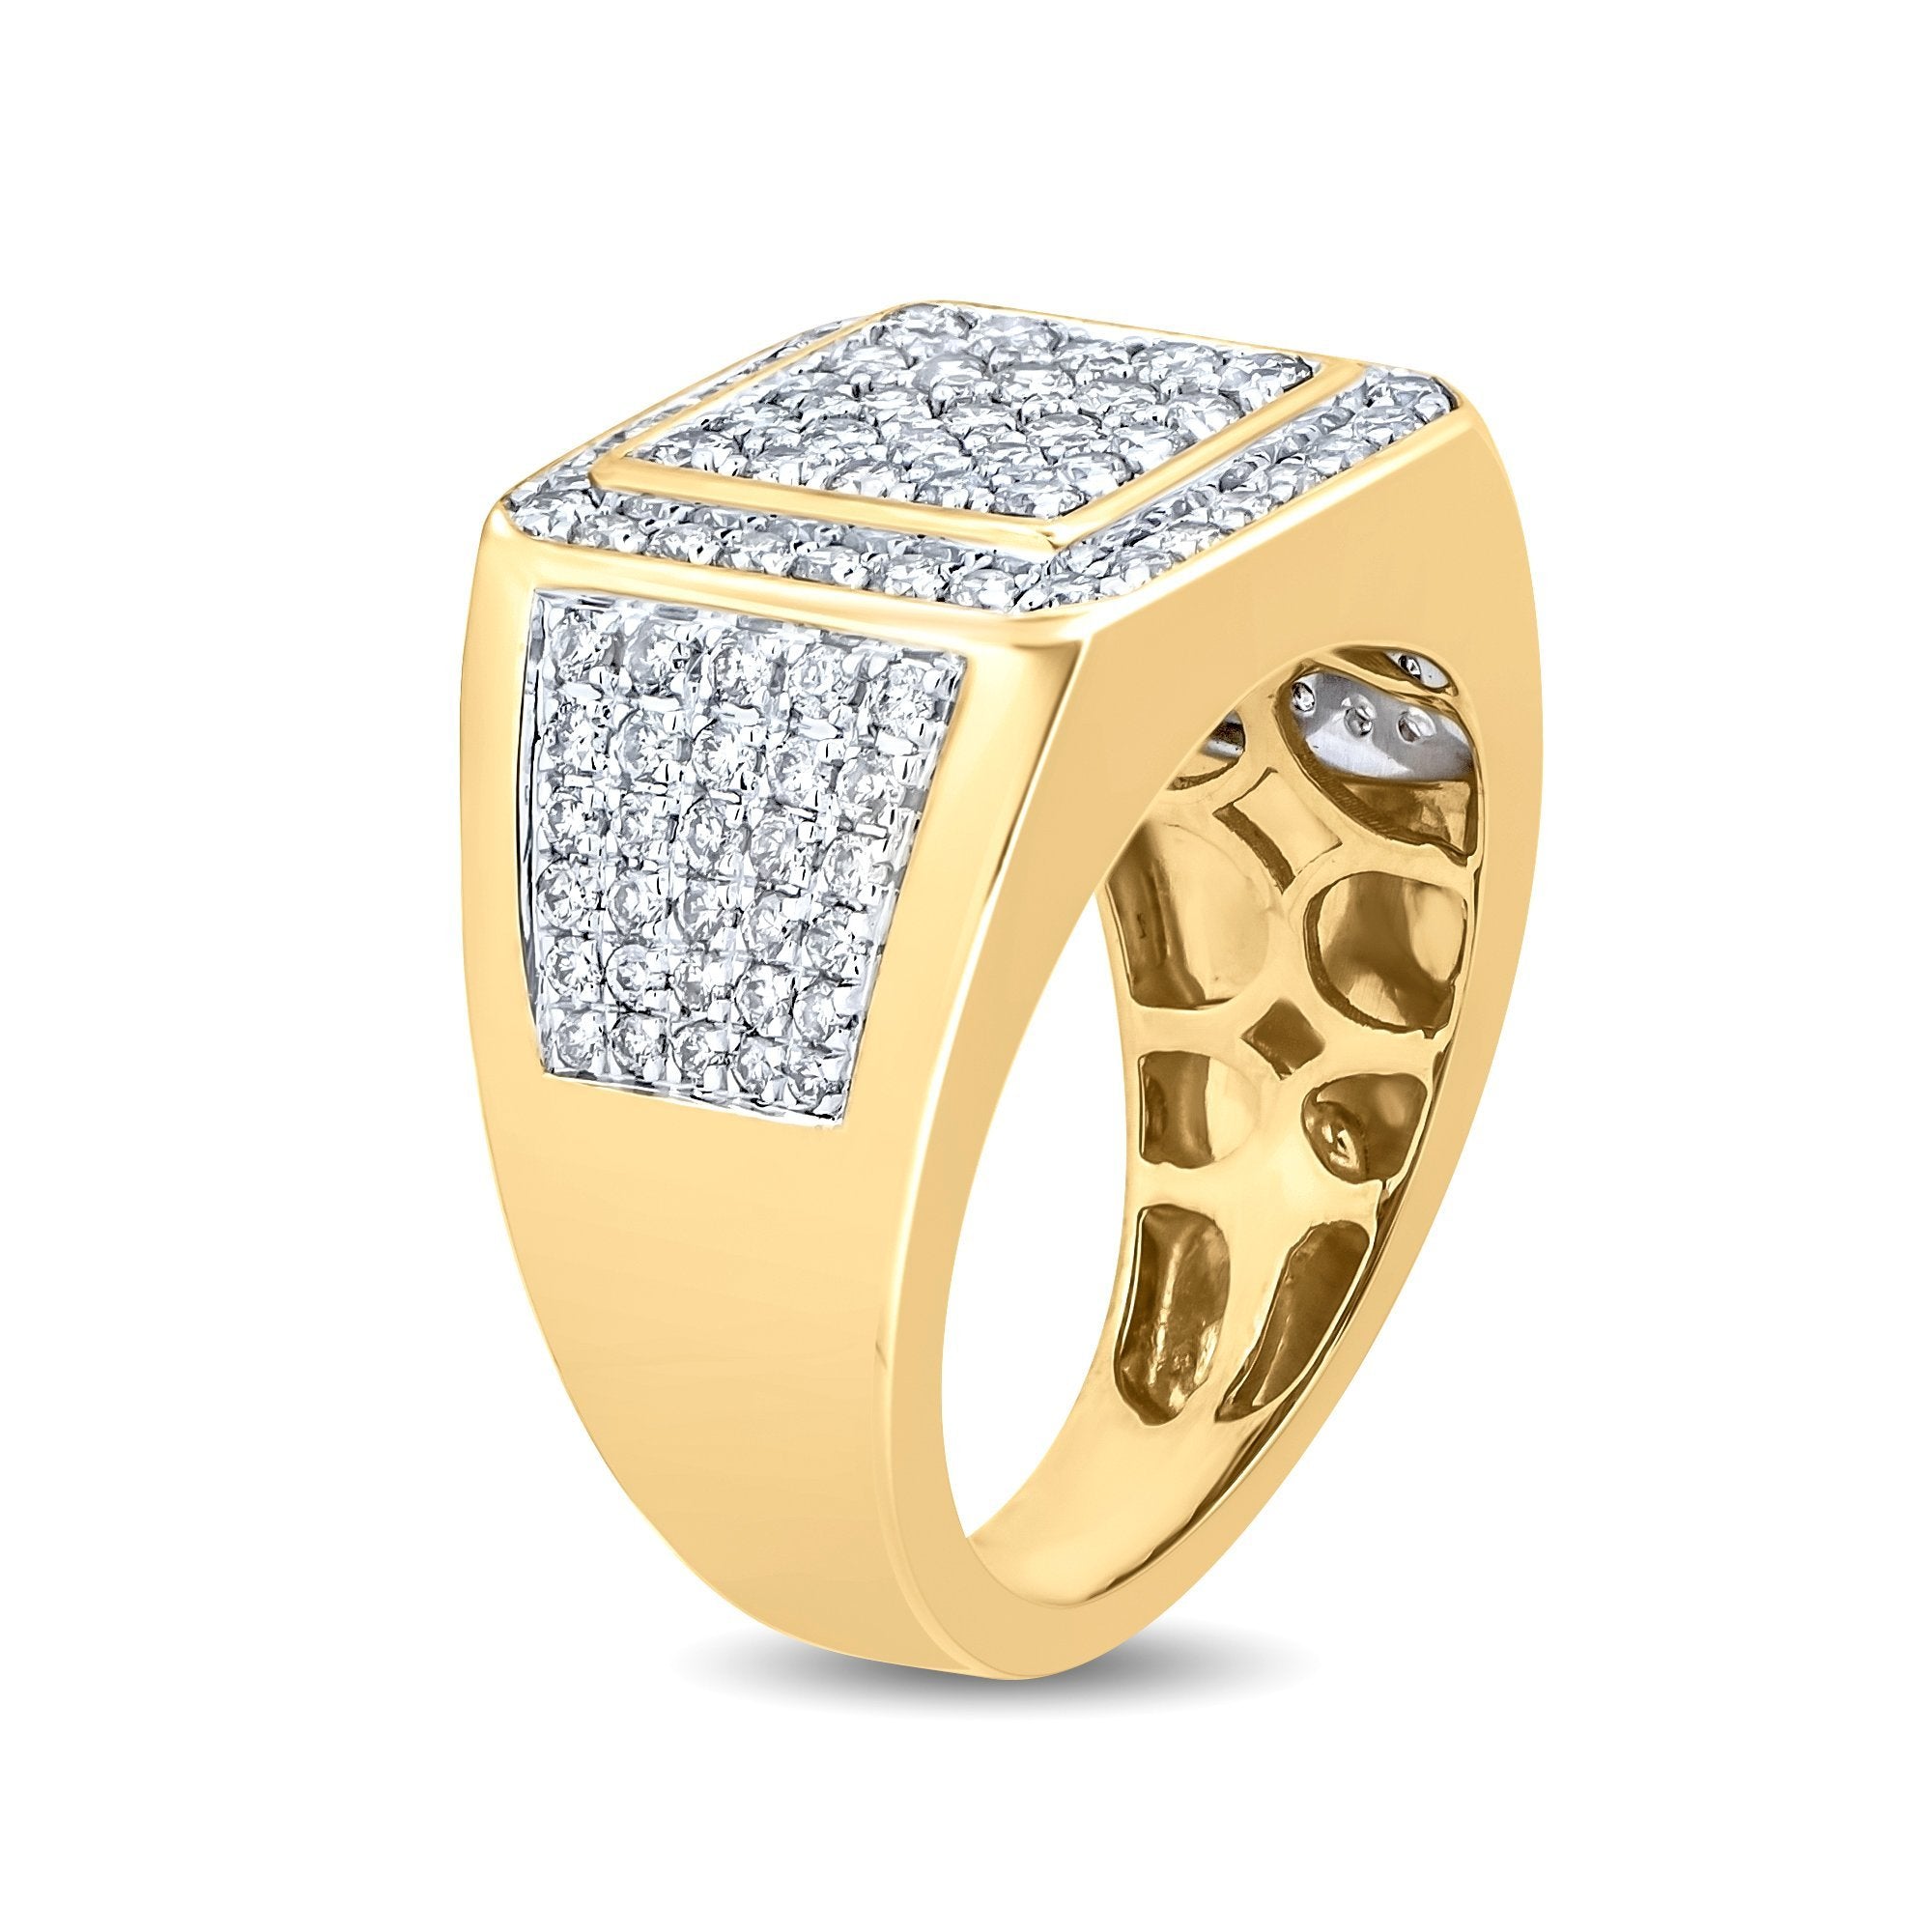 Vintage White Zircon Stone Mens Gold Diamond Rings For Men And Women Luxury  Yellow Gold Engagement Charm Crystal By Dhjnz From Dh_garden, $8.27 |  DHgate.Com